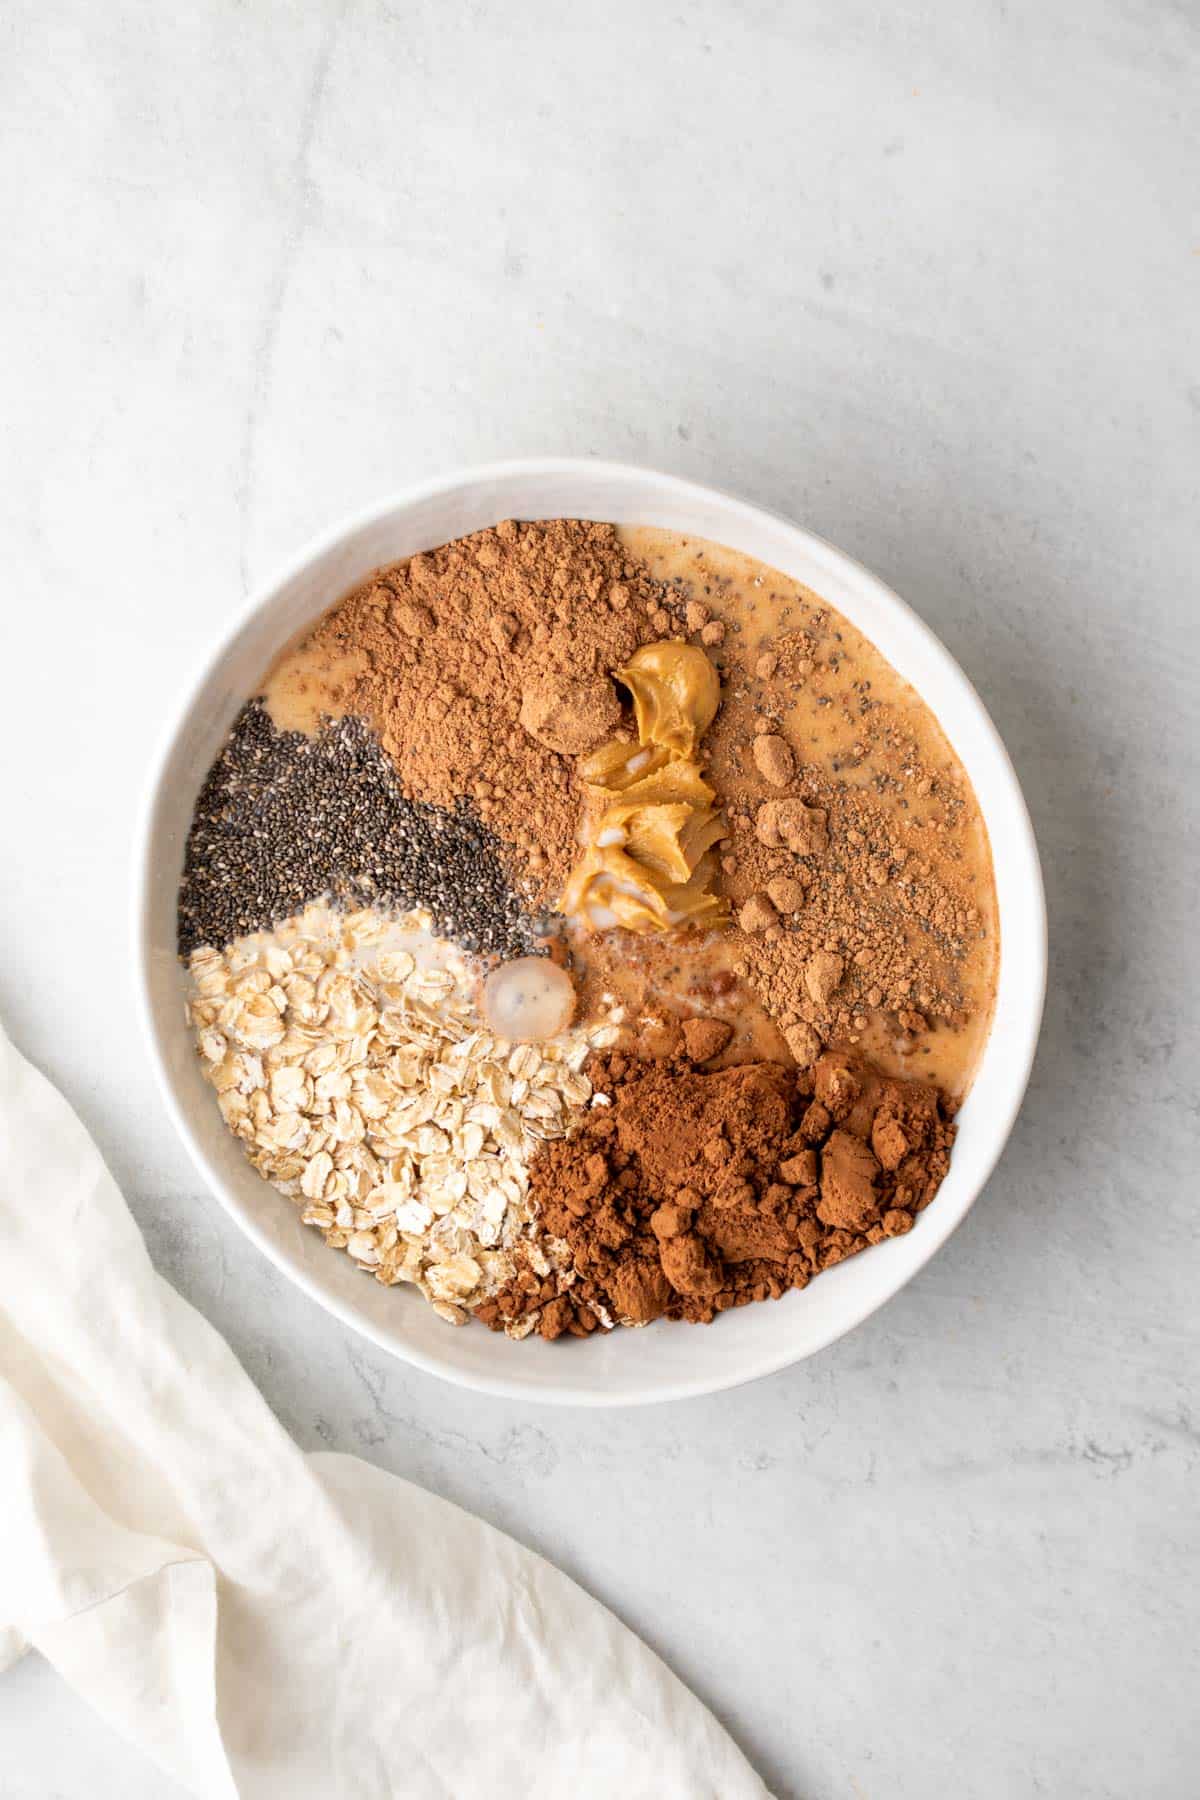 protein powder added to bowl of chocolate overnight oats ingredients